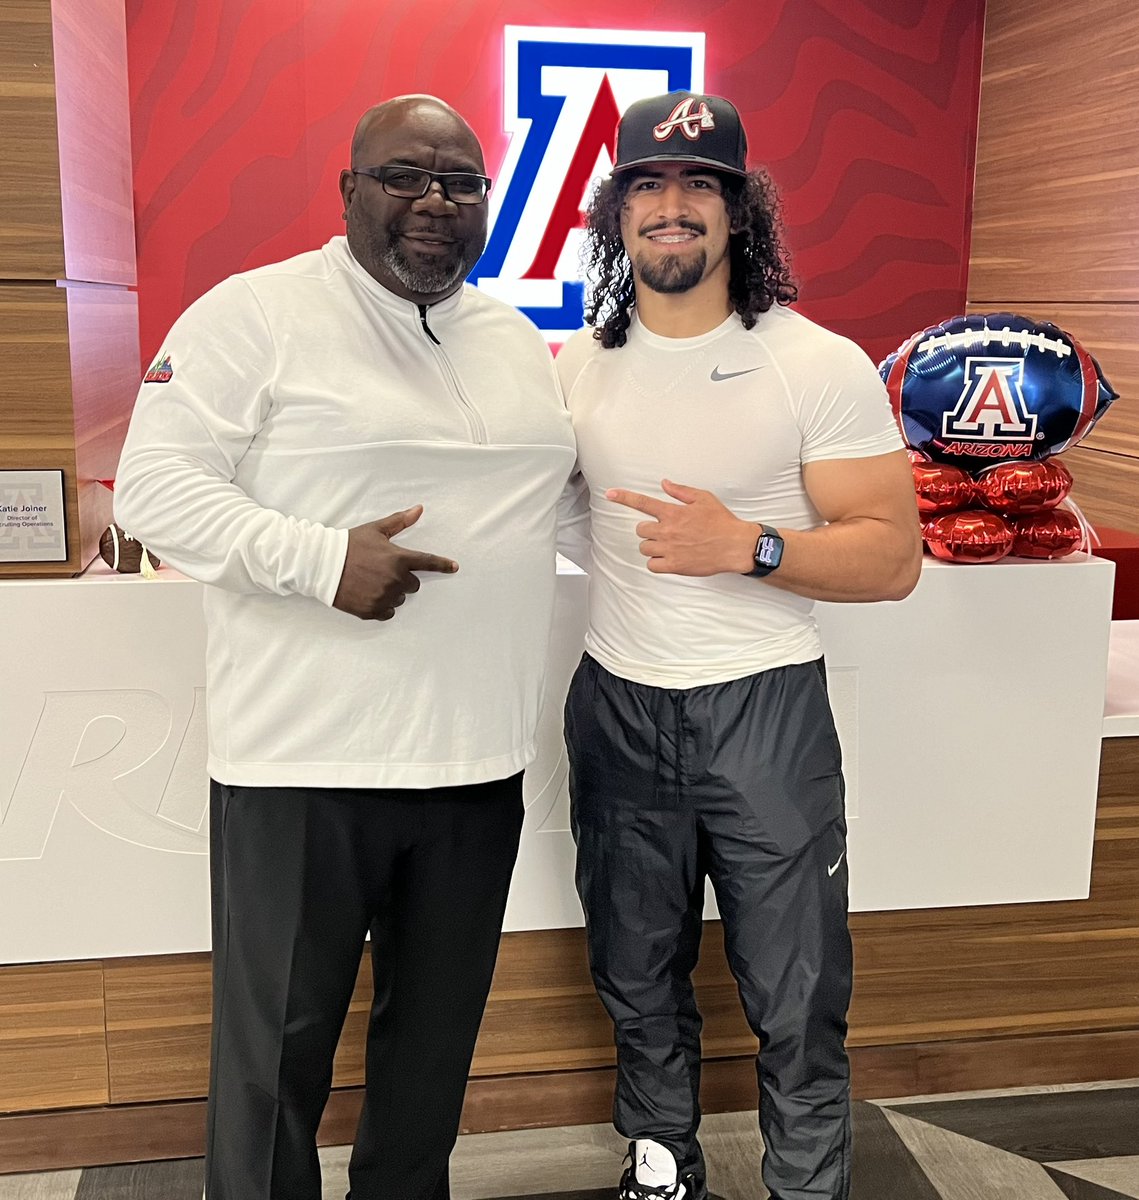 Had a great time with @RealCoachCarter and @ArizonaFBall today. Thank you guys for everything #BearDown🐻⬇️👌